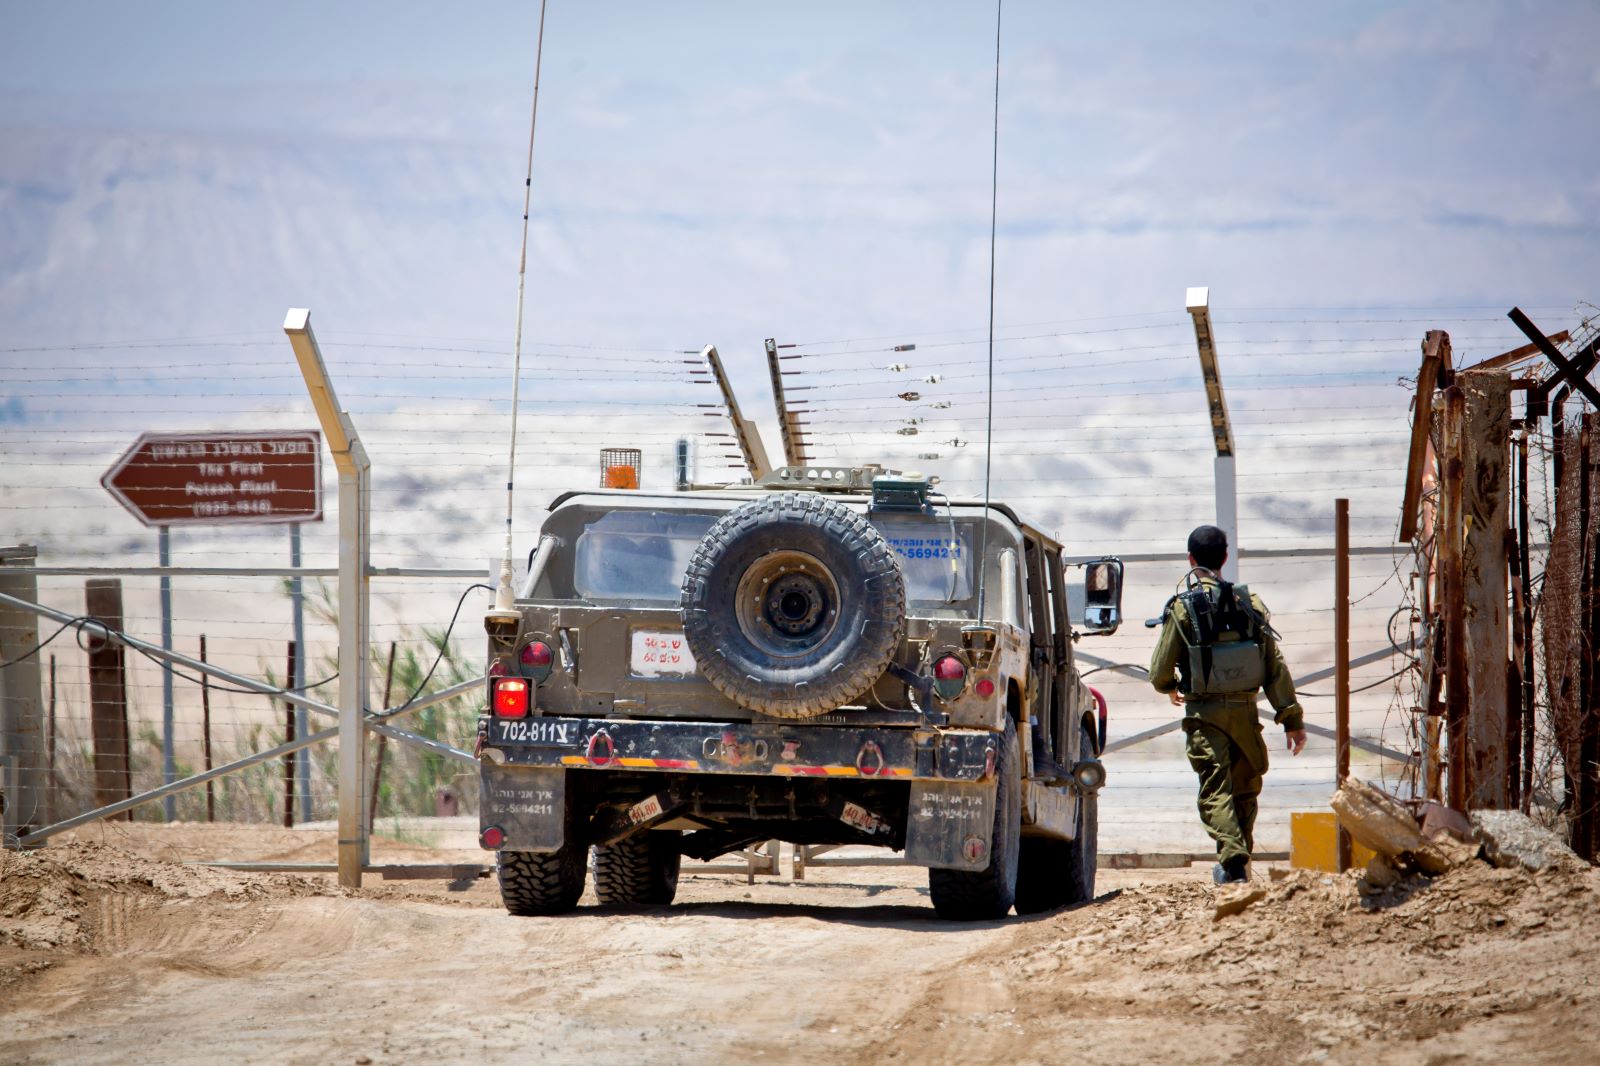 Israeli soldiers patrol near Beit HaArava, an Israeli settlement and kibbutz in the West Bank, located near the Dead Sea and Jericho at the Beit HaArava Junction. May 6, 2015. (Moshe Shai/Flash90)